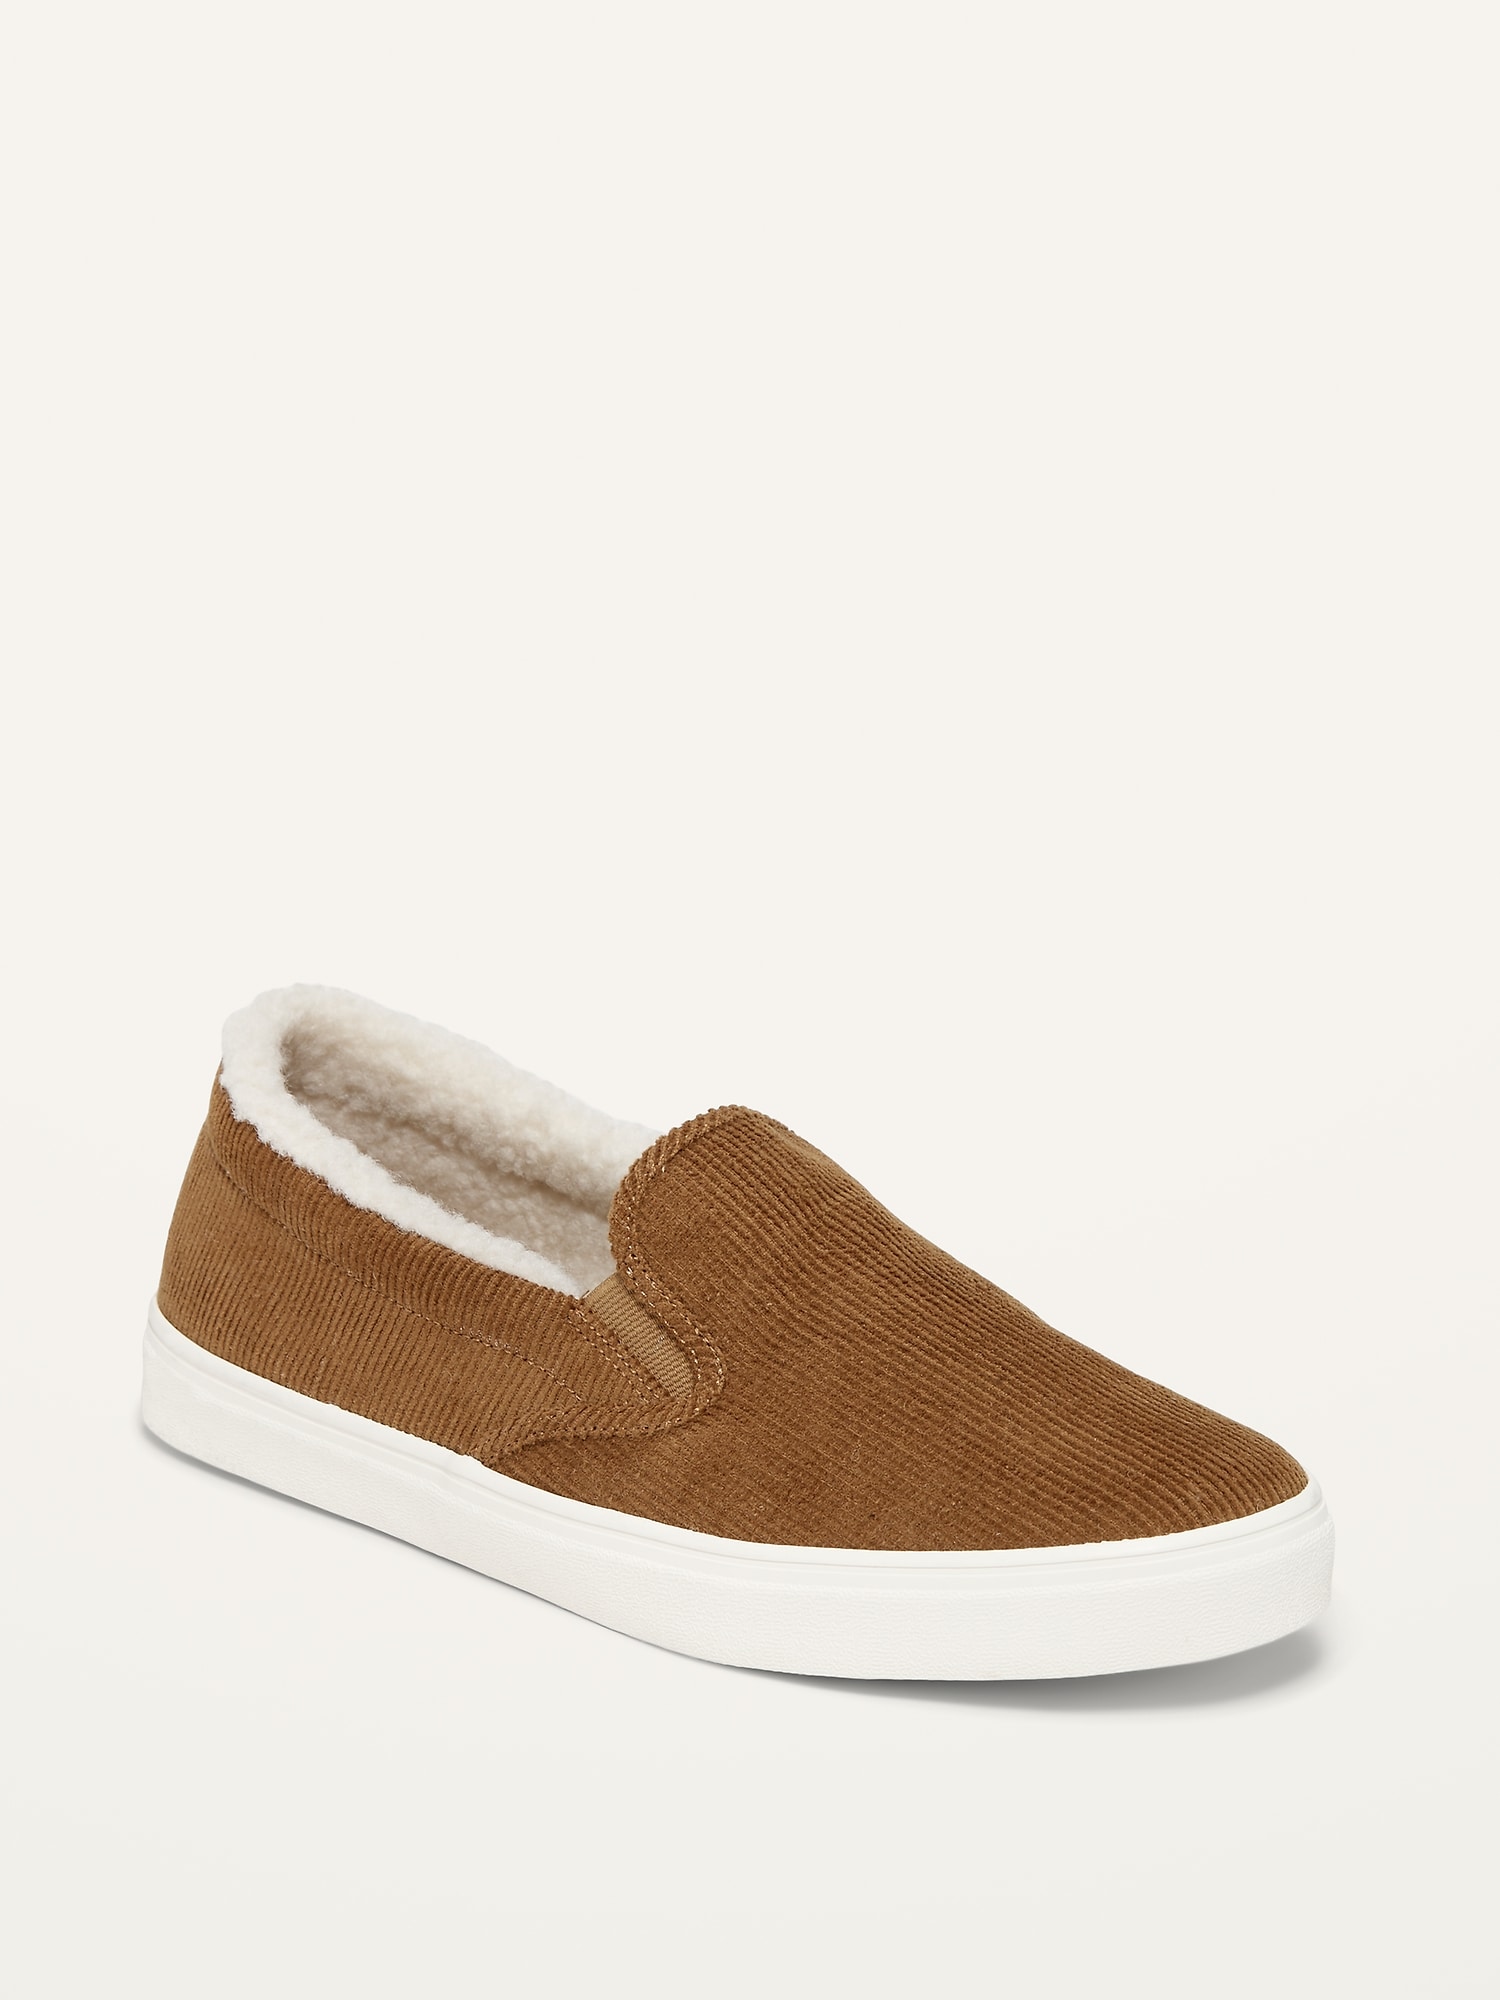 Cozy Sherpa-Lined Slip-On Sneakers For Women | Old Navy